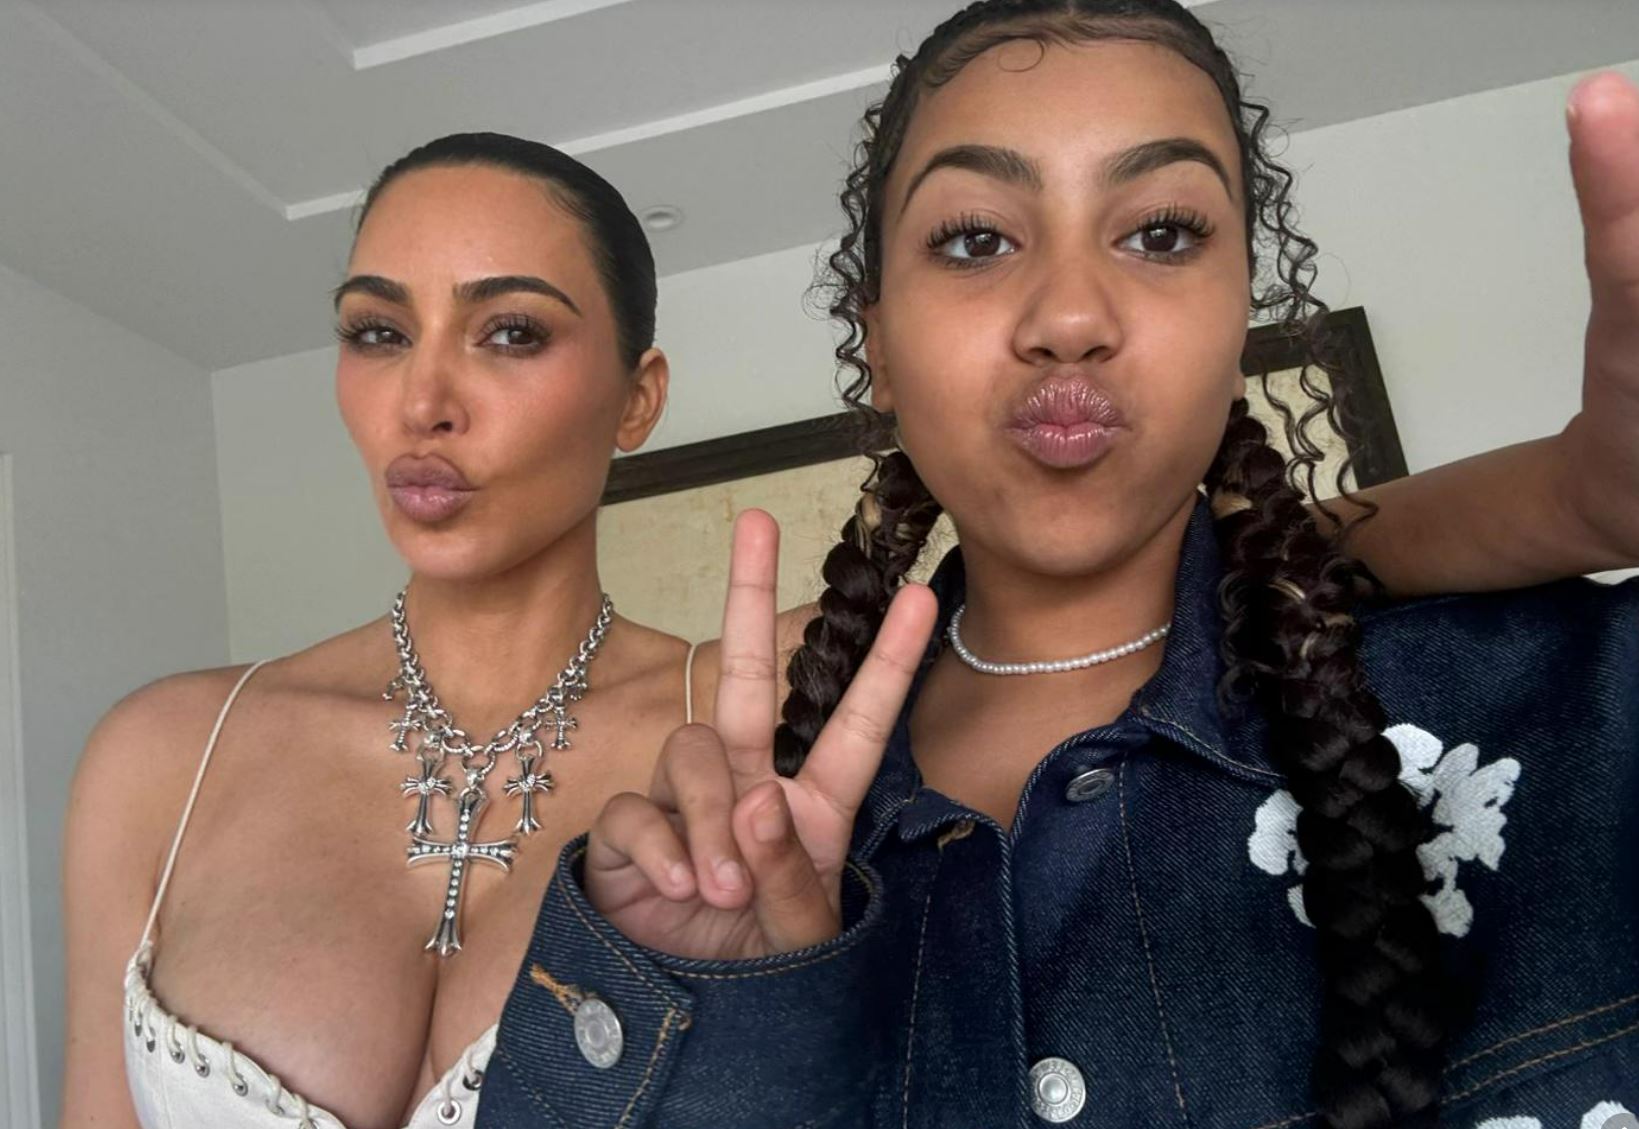 Fans recently gushed over how much North looks like her famous mom